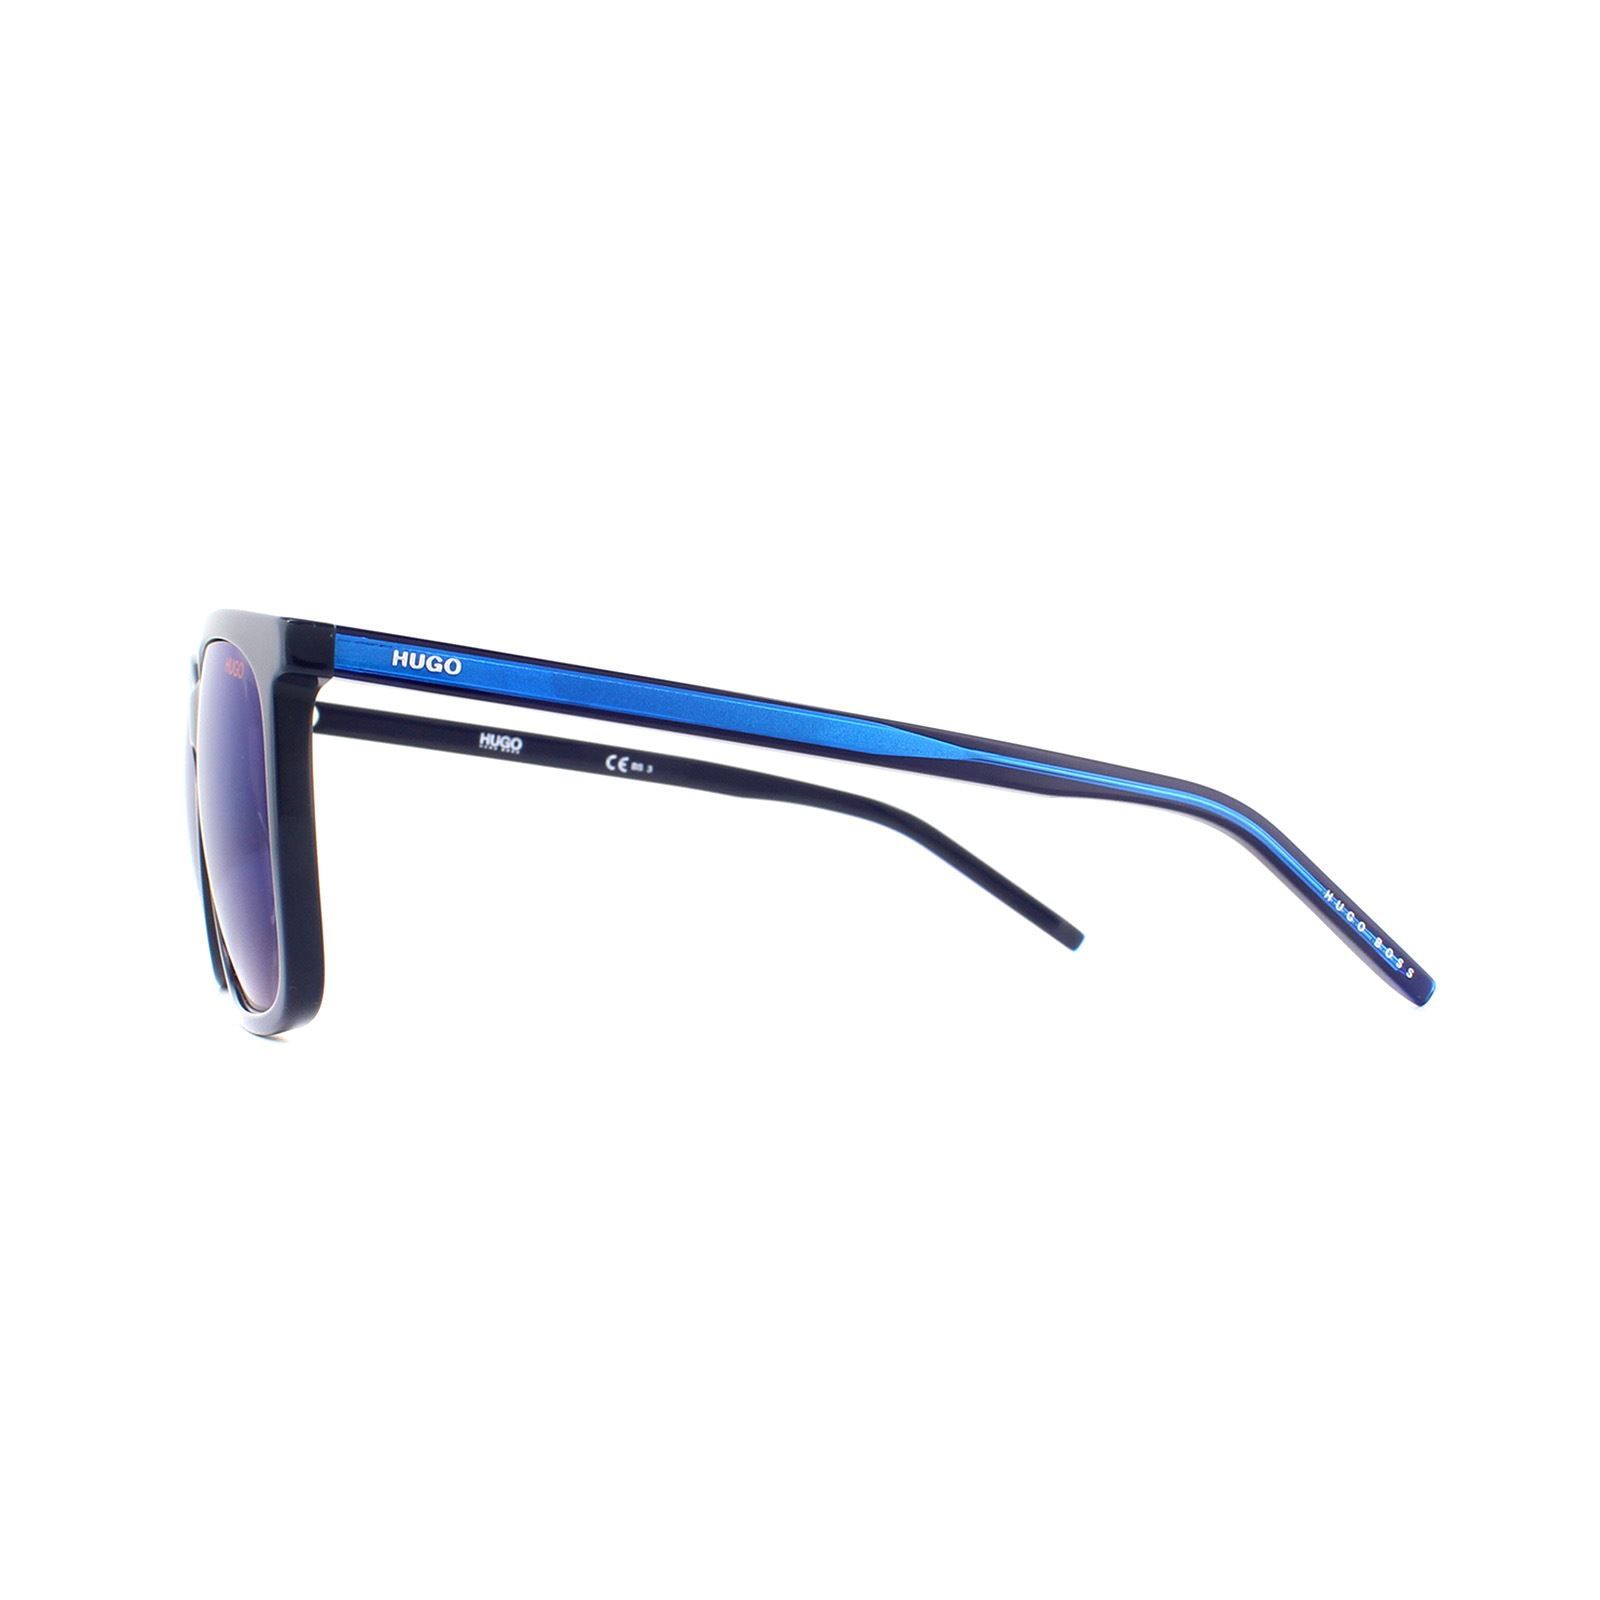 Hugo by Hugo Boss Sunglasses HG 1027/S PJP XT Blue Blue Sky Mirror are made of multi-layer acetate by Hugo for a modern fresh look with pops of colour on the temples for a funky trendy finish.